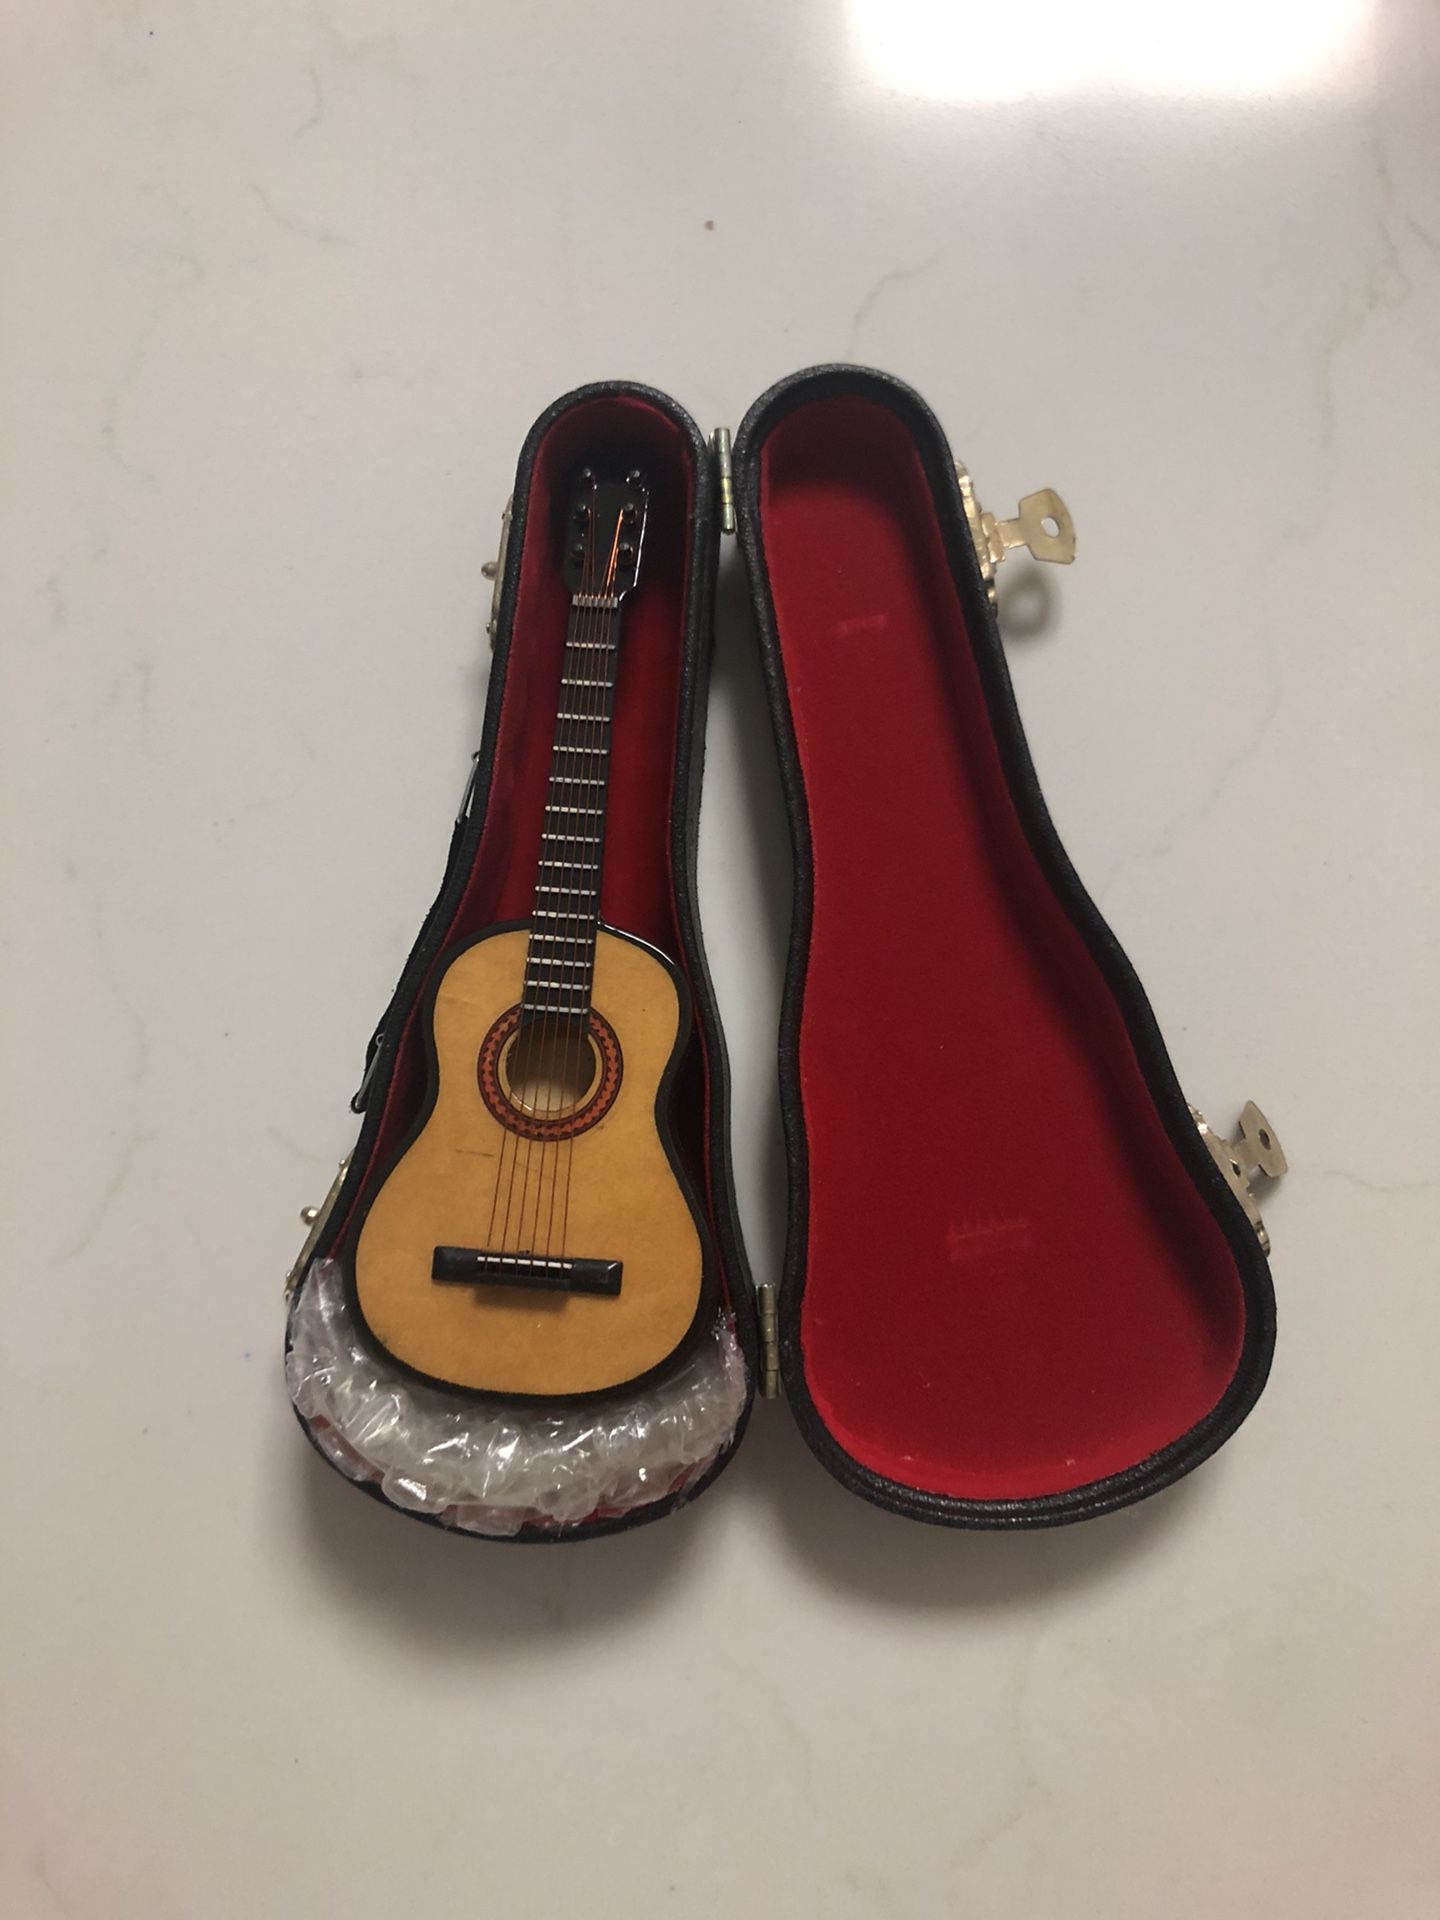 Tiny Collectible guitar with Stand A8 6” inches